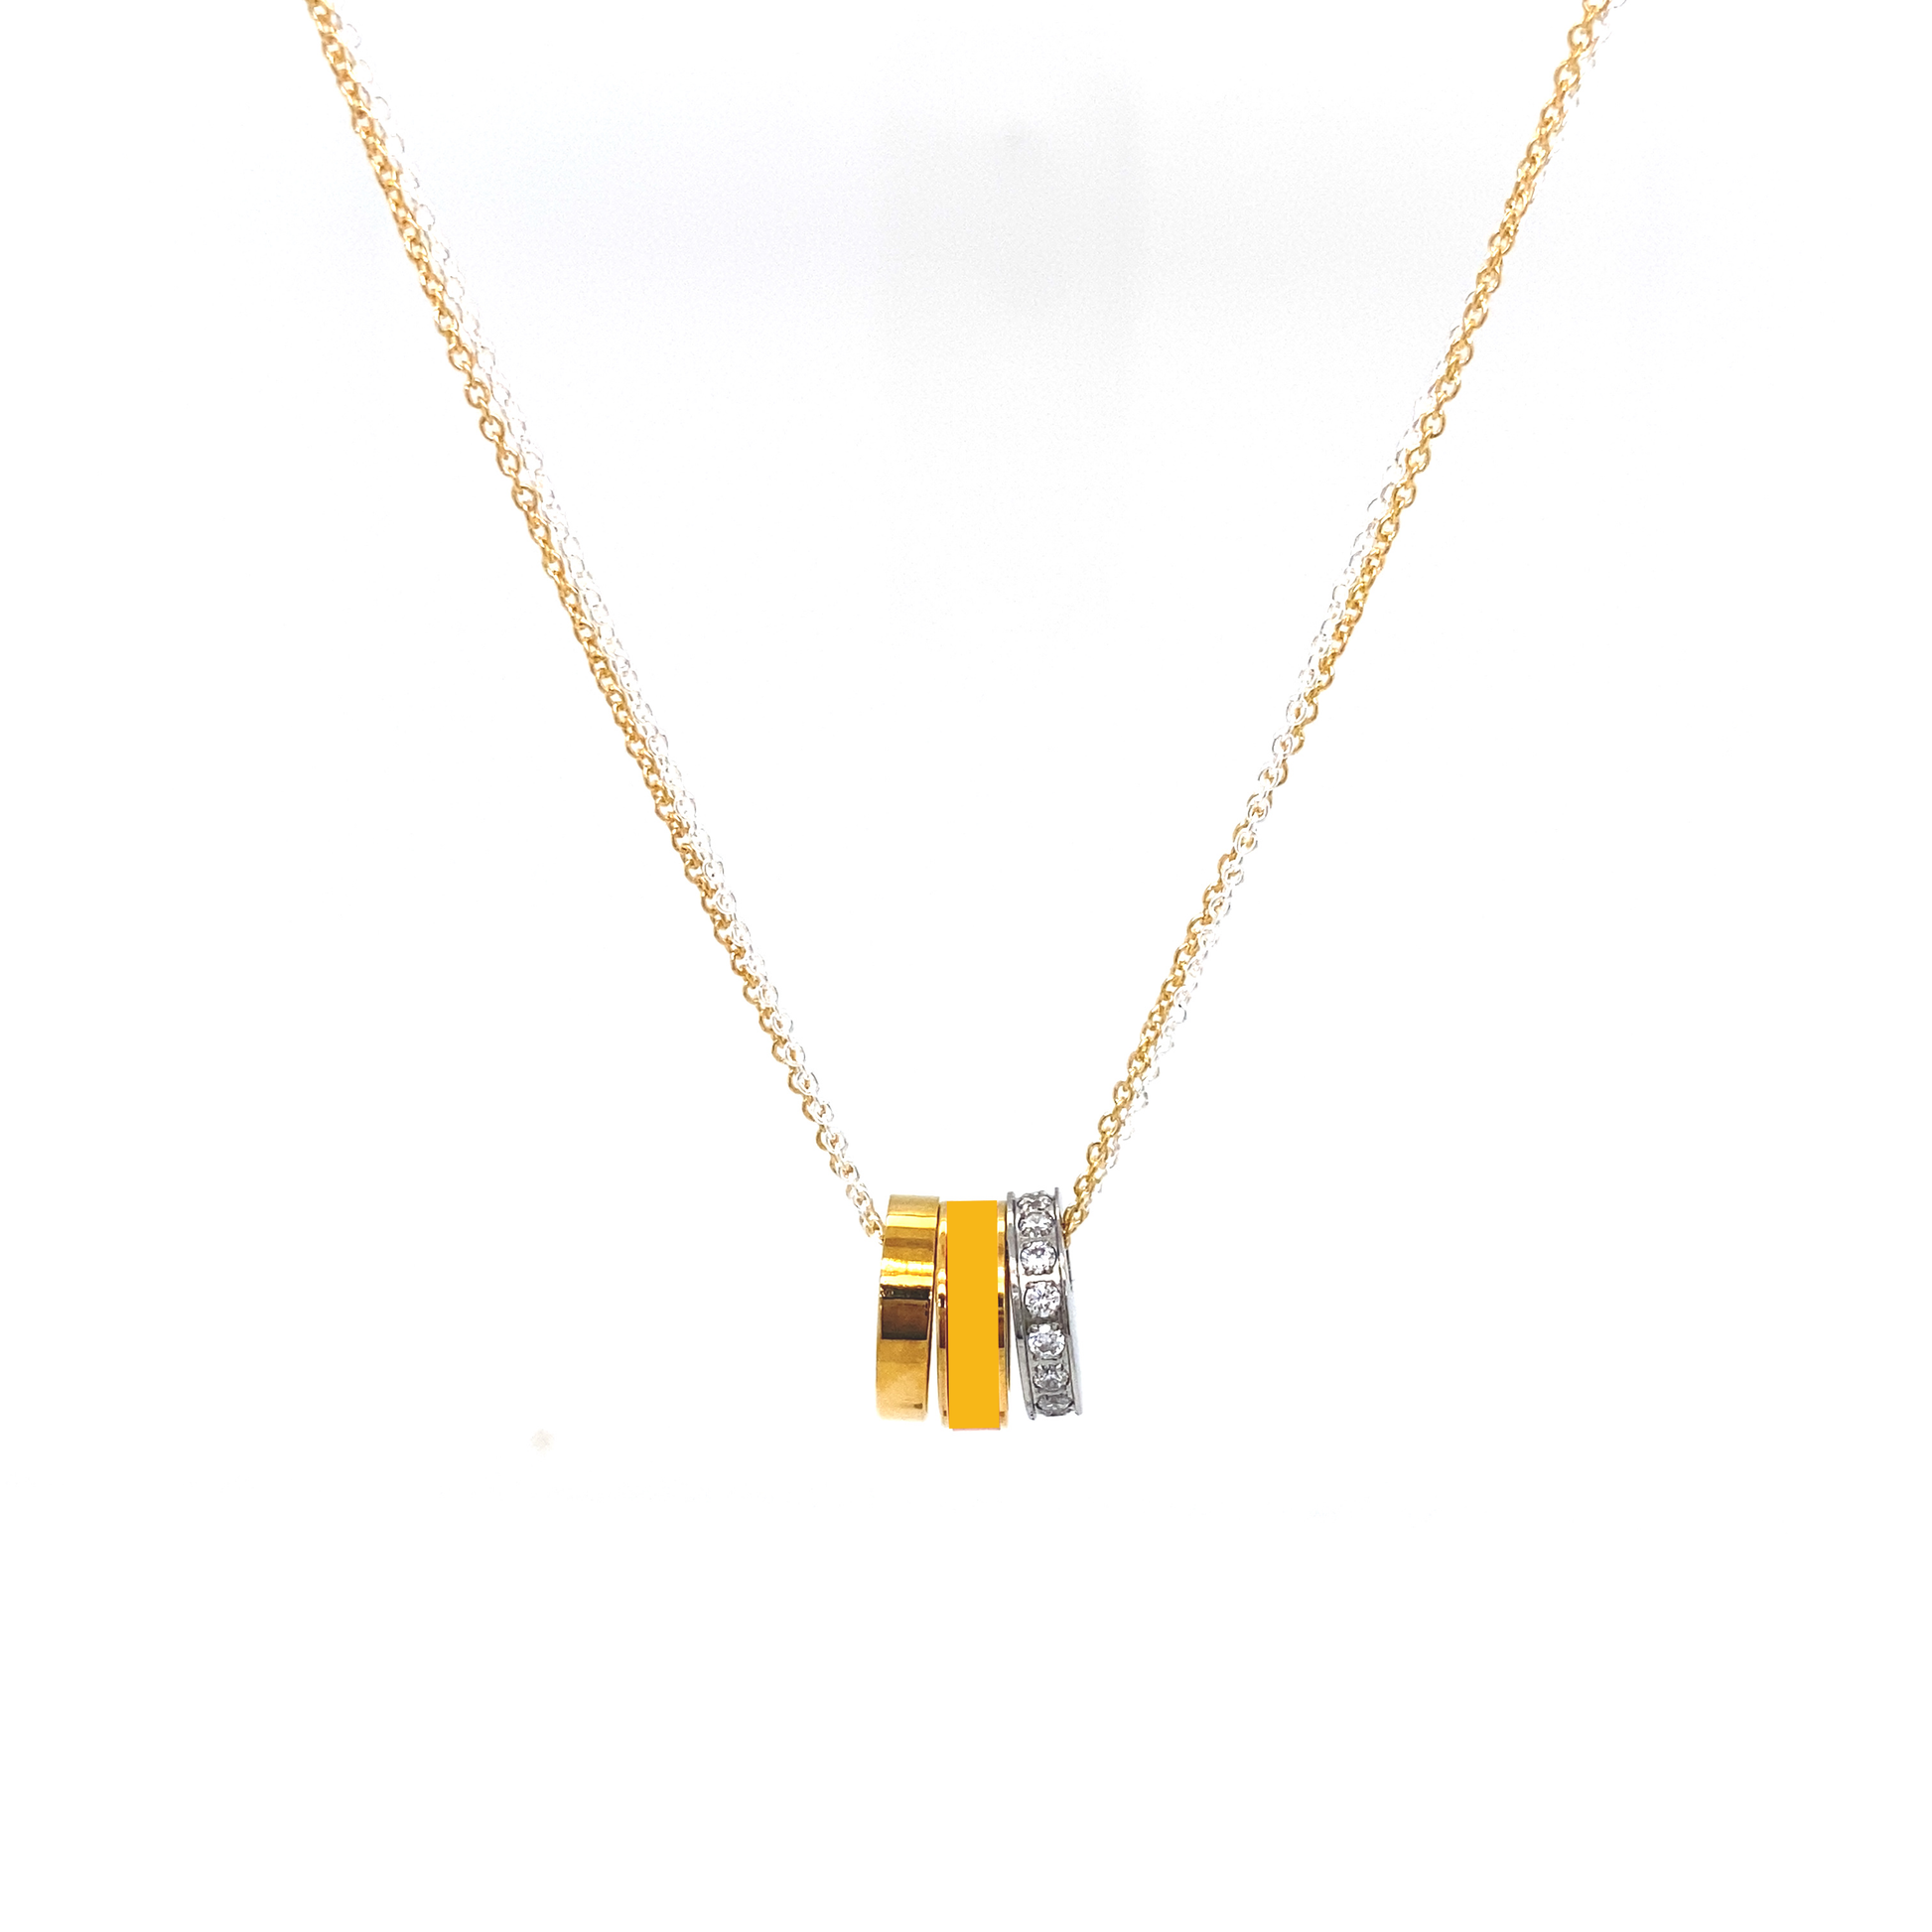 WEWA DOUBLE CHAIN 3 CHIPS SPECTRA YELLOW NECKLACE